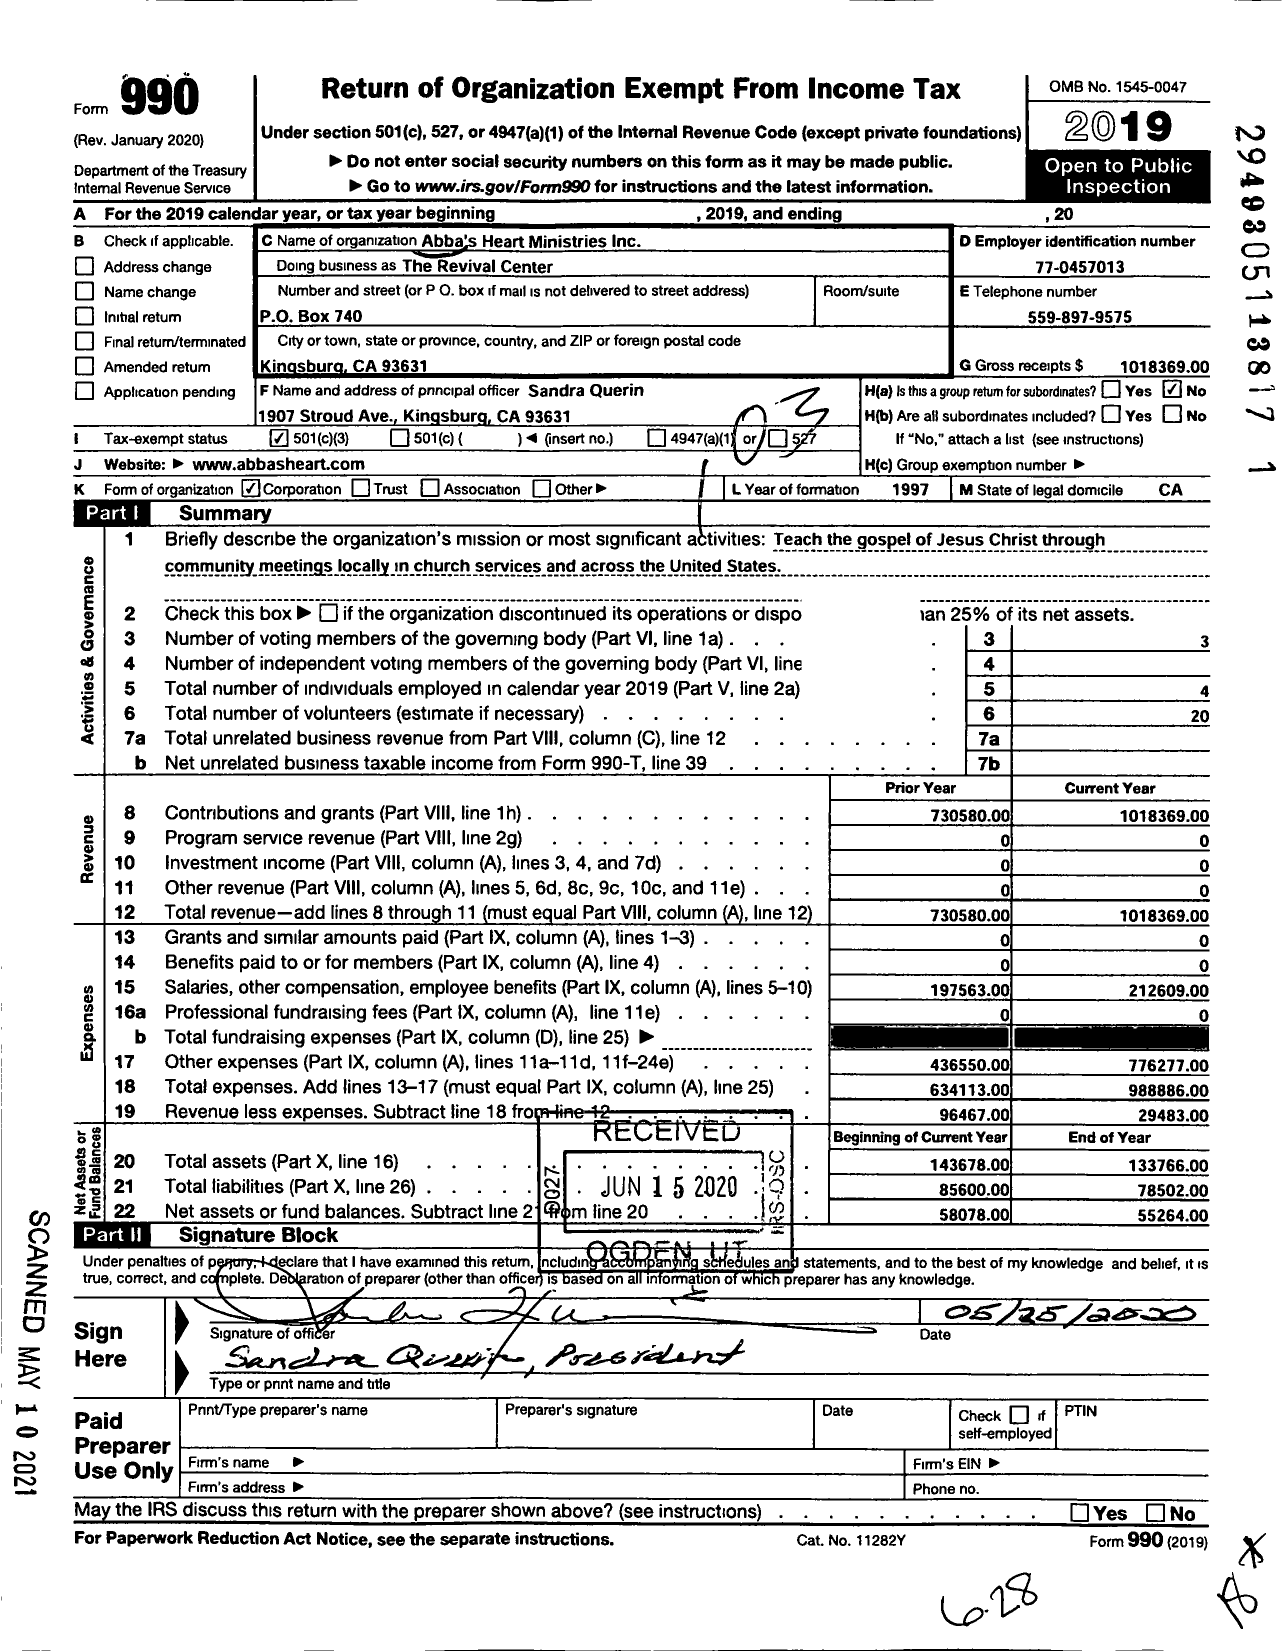 Image of first page of 2019 Form 990 for The Revival Center